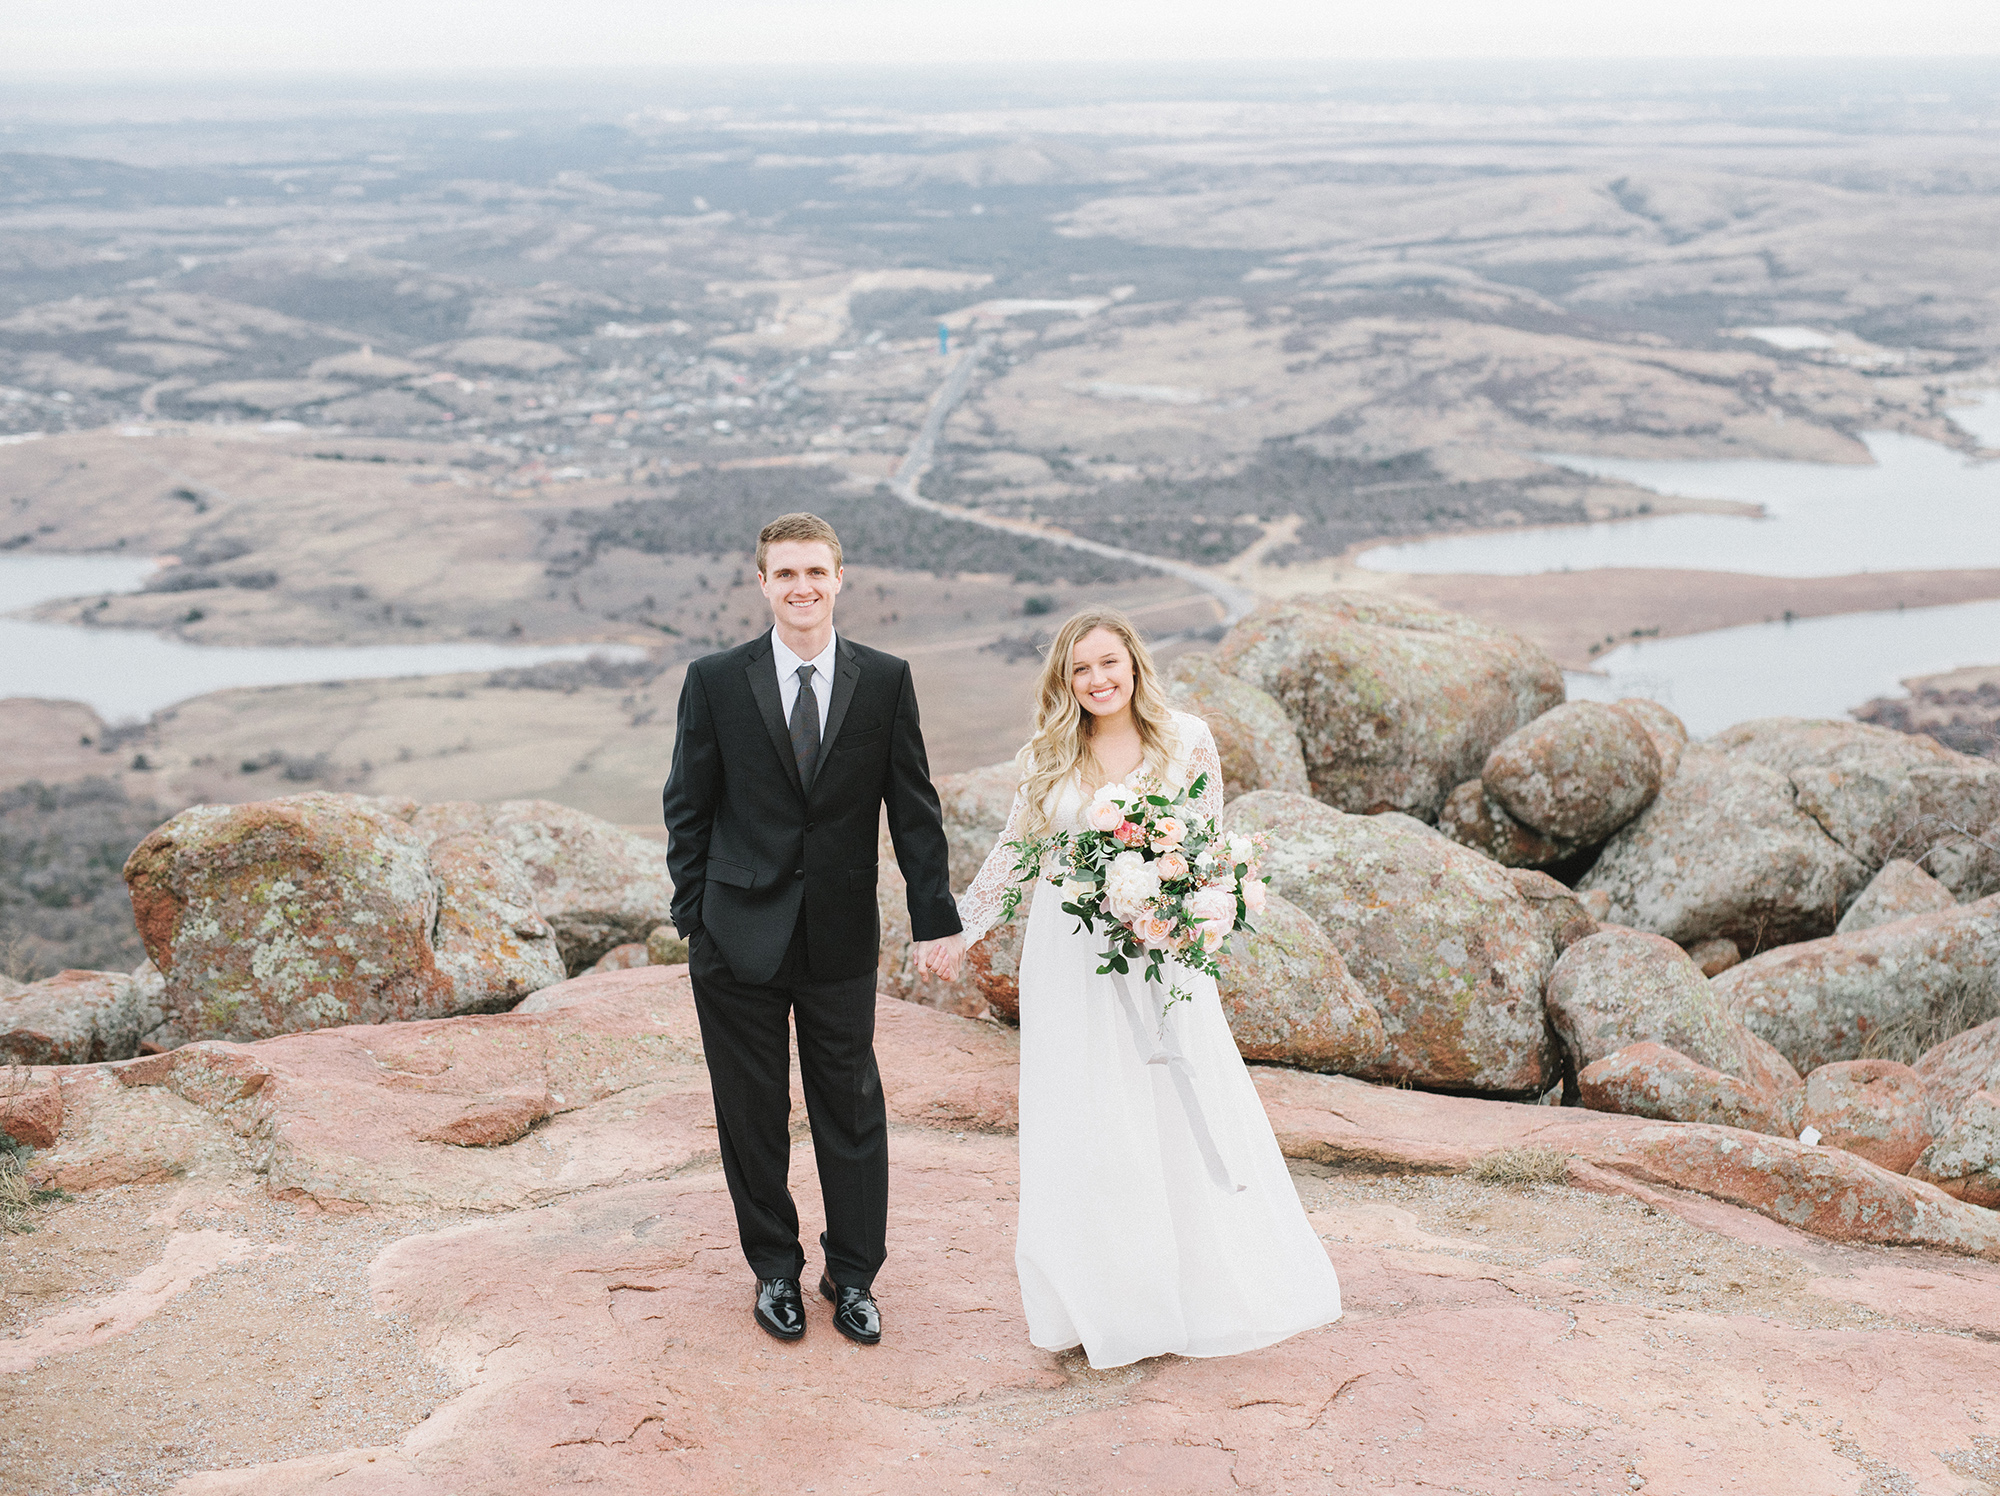 White Sparrow wedding photographer Tenth & Grace captures this winter engagement session.